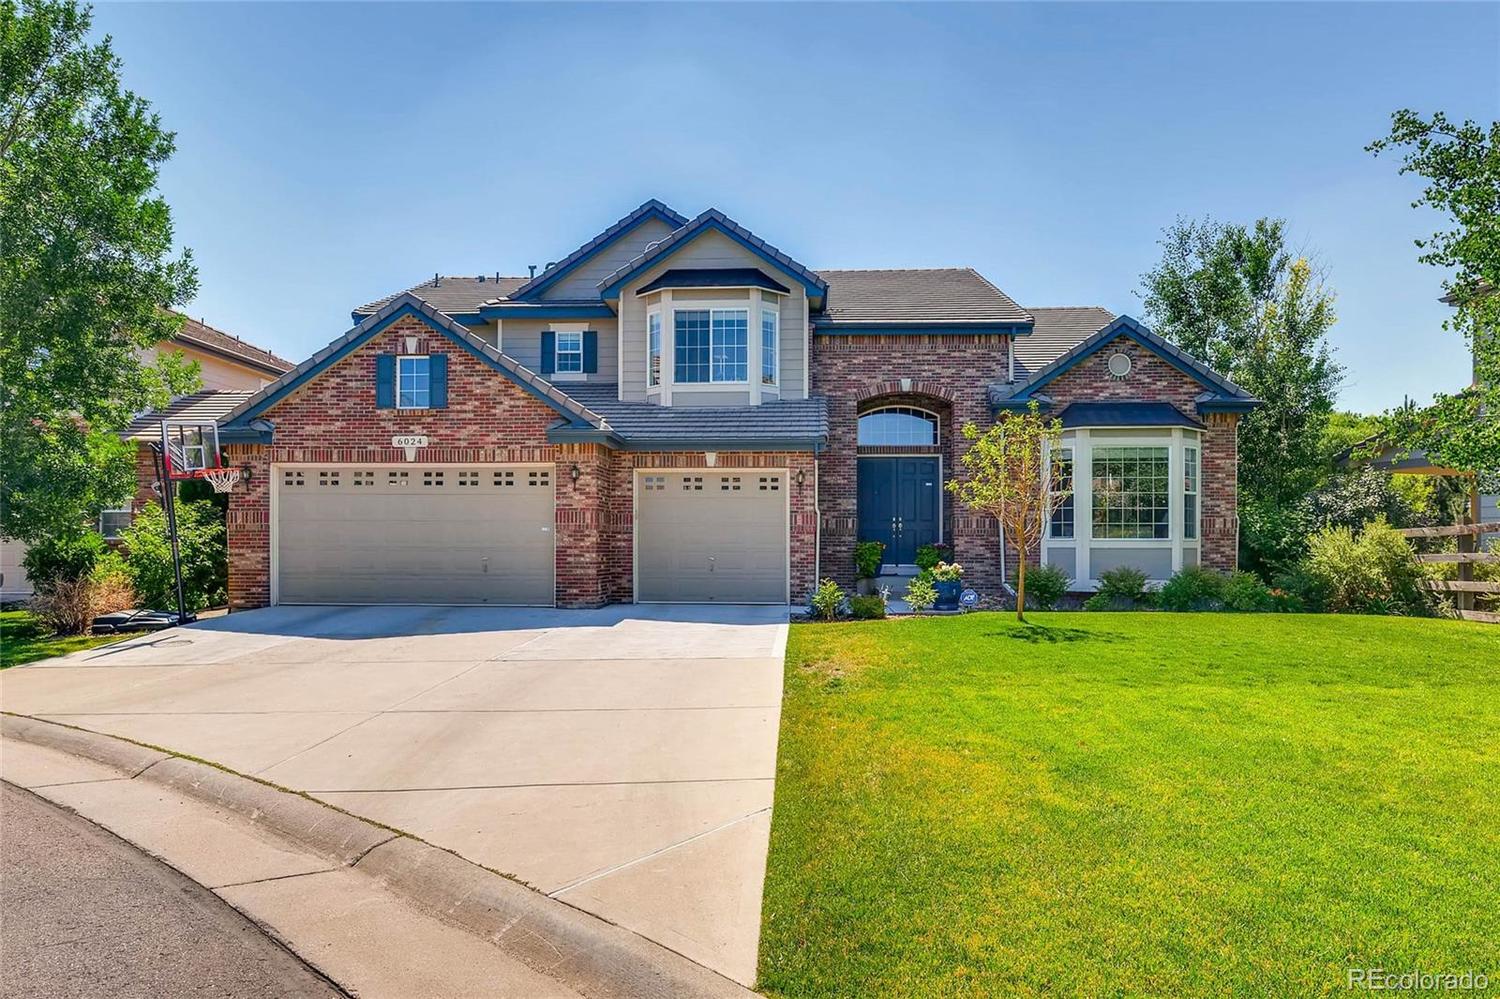 Gorgeous home with large front yard!